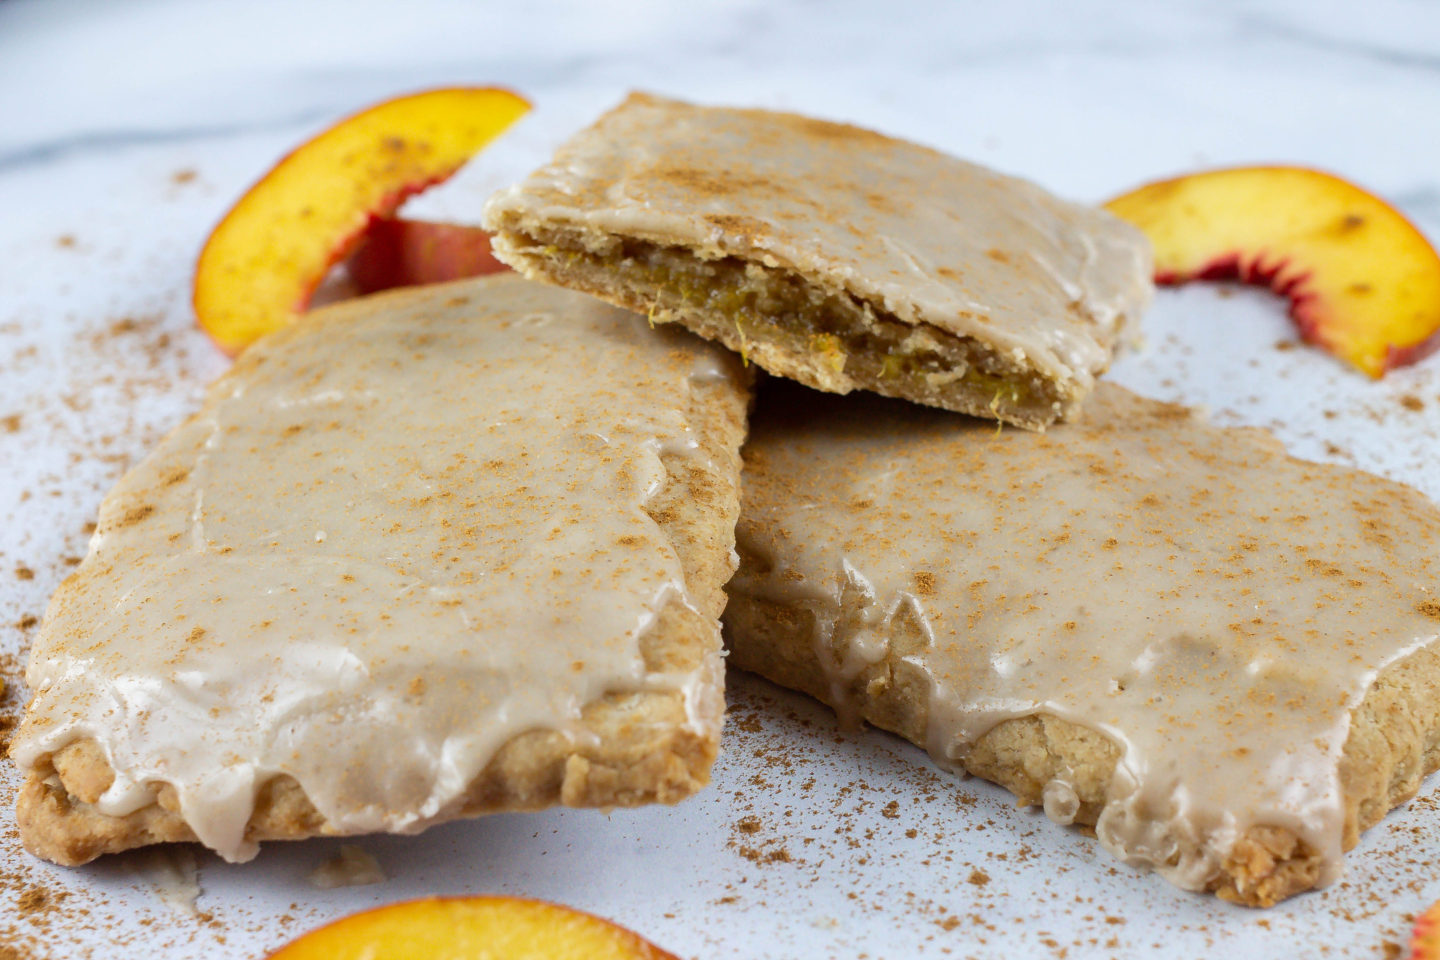 Homemade Pop-Tarts - Peach and Ginger Pop Tarts stacked on each other with fresh Peach slices